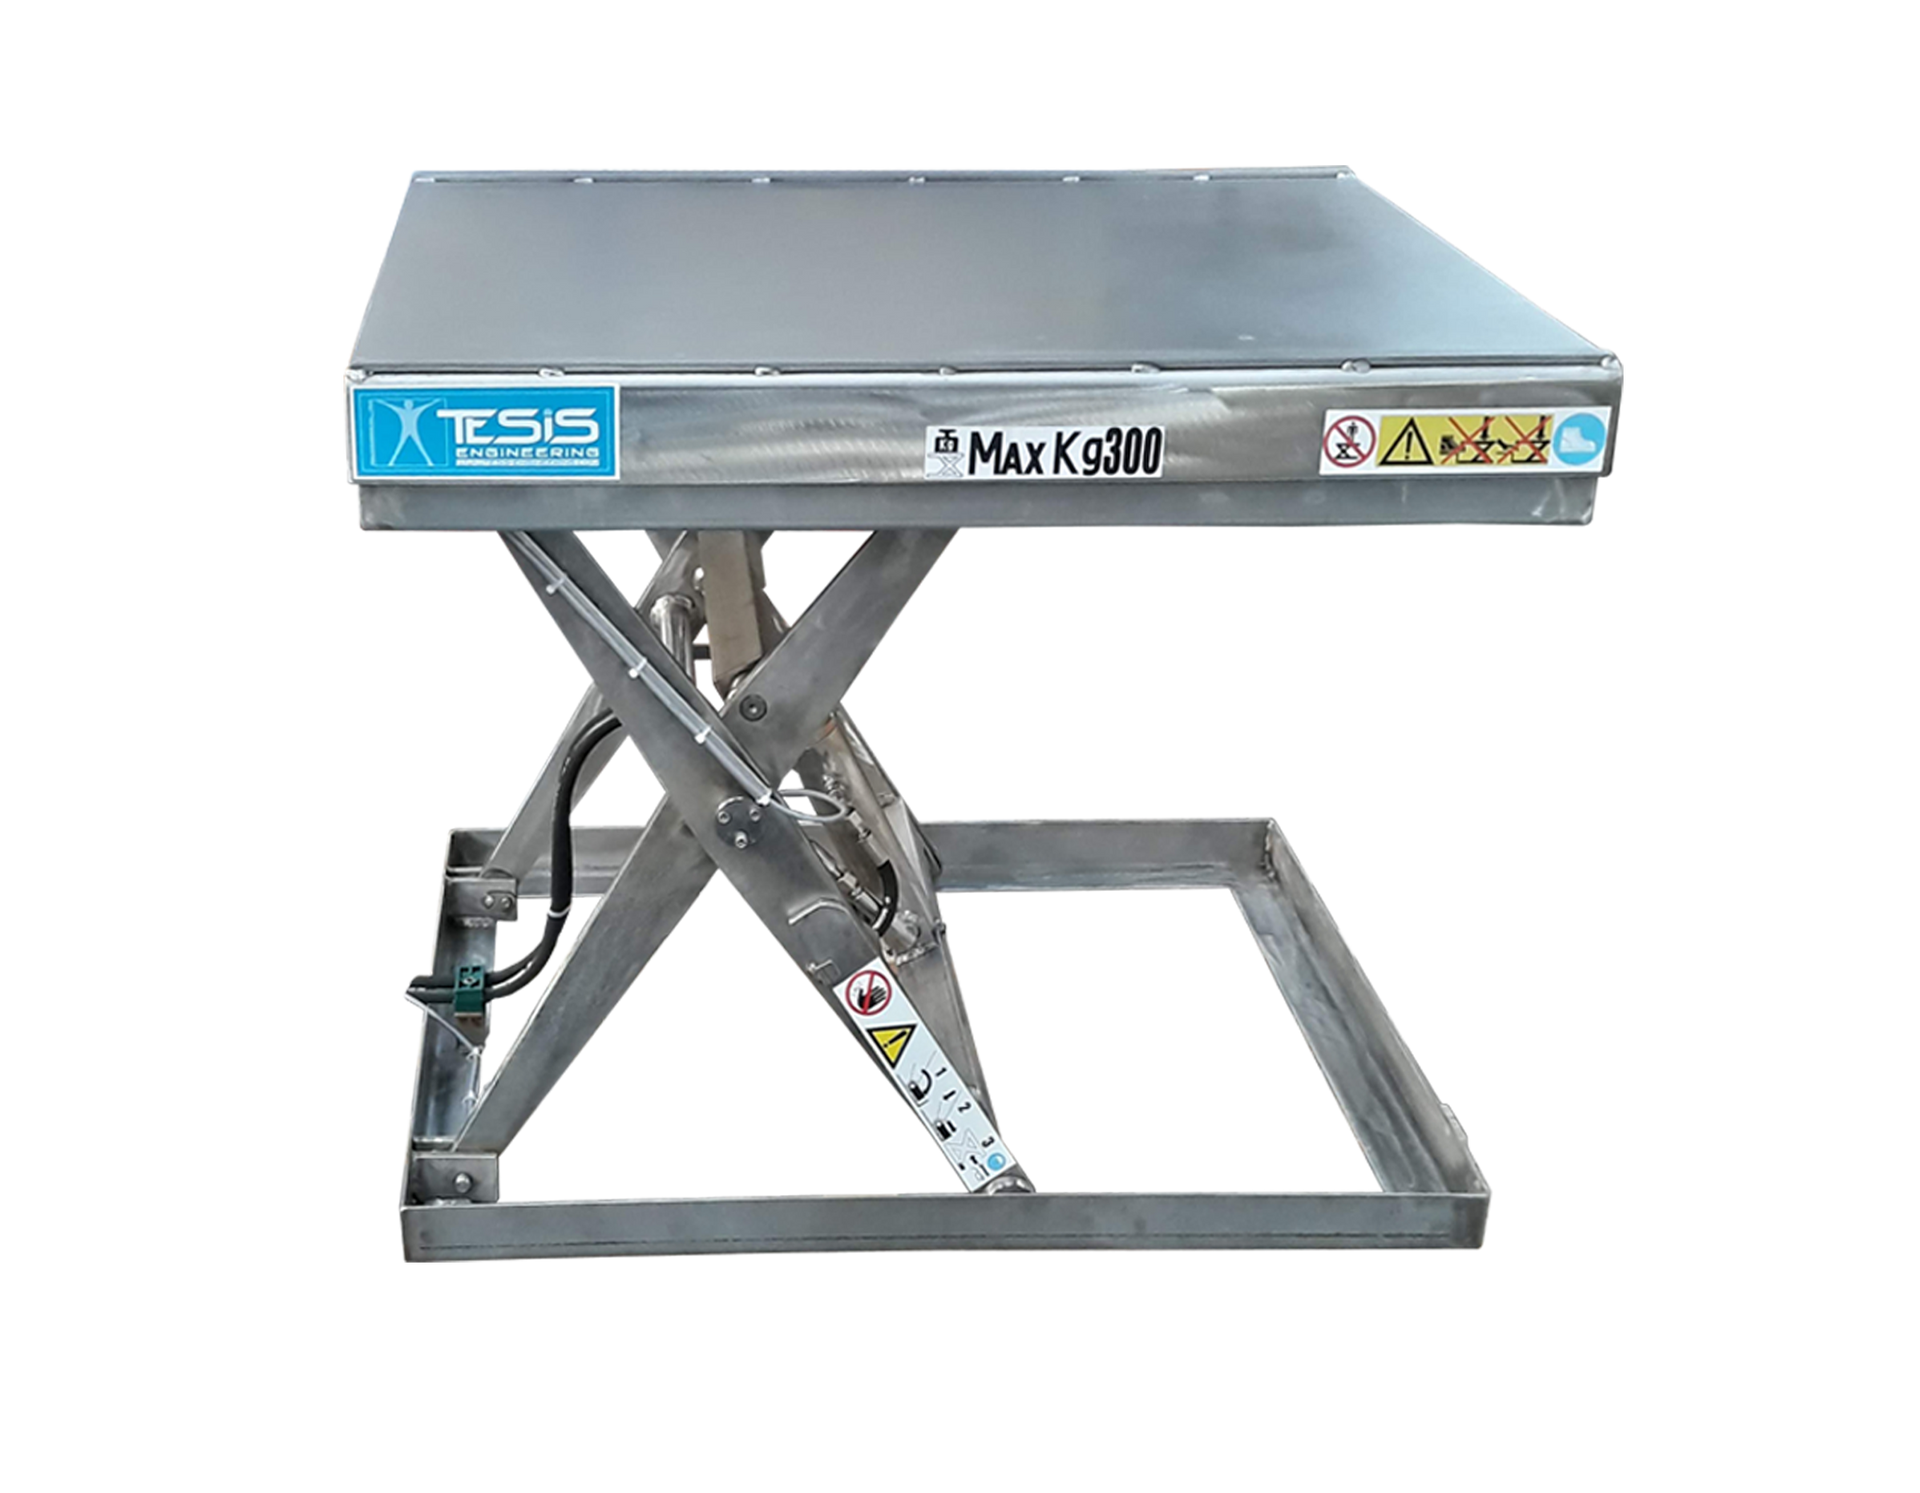 Stainless steel lift tables, stainless steel hydraulic platform lifts, stainless steel scissor lifts